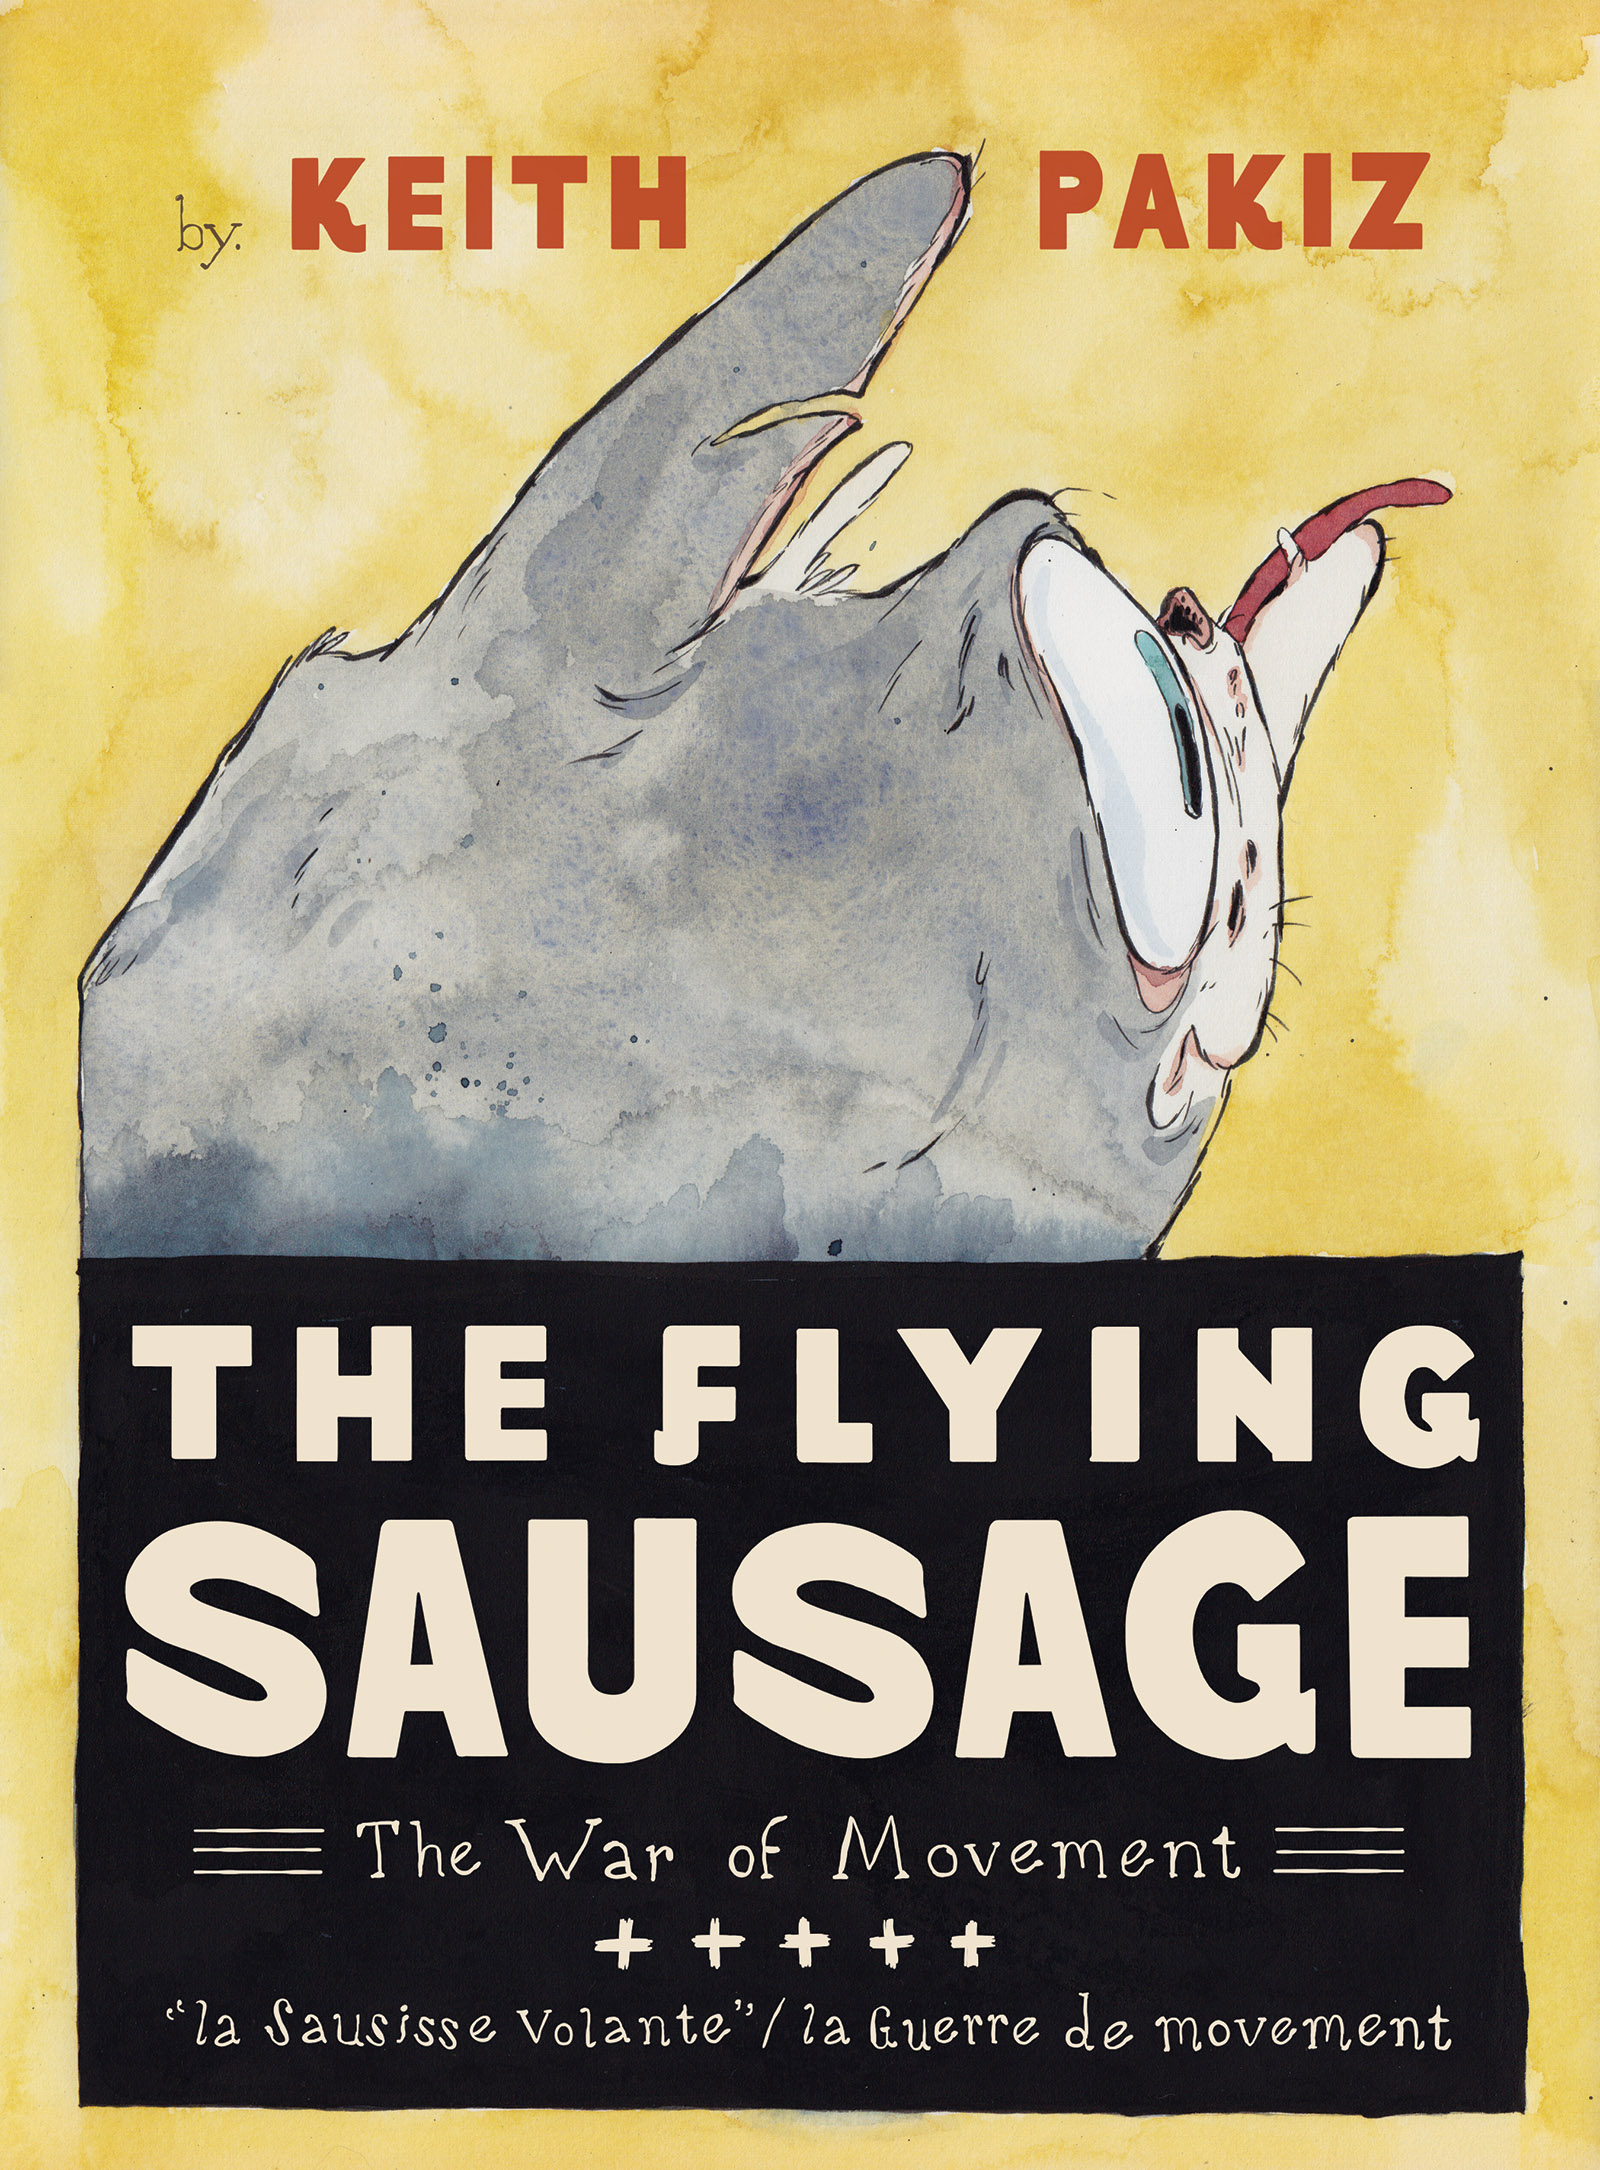 The Flying Sausage